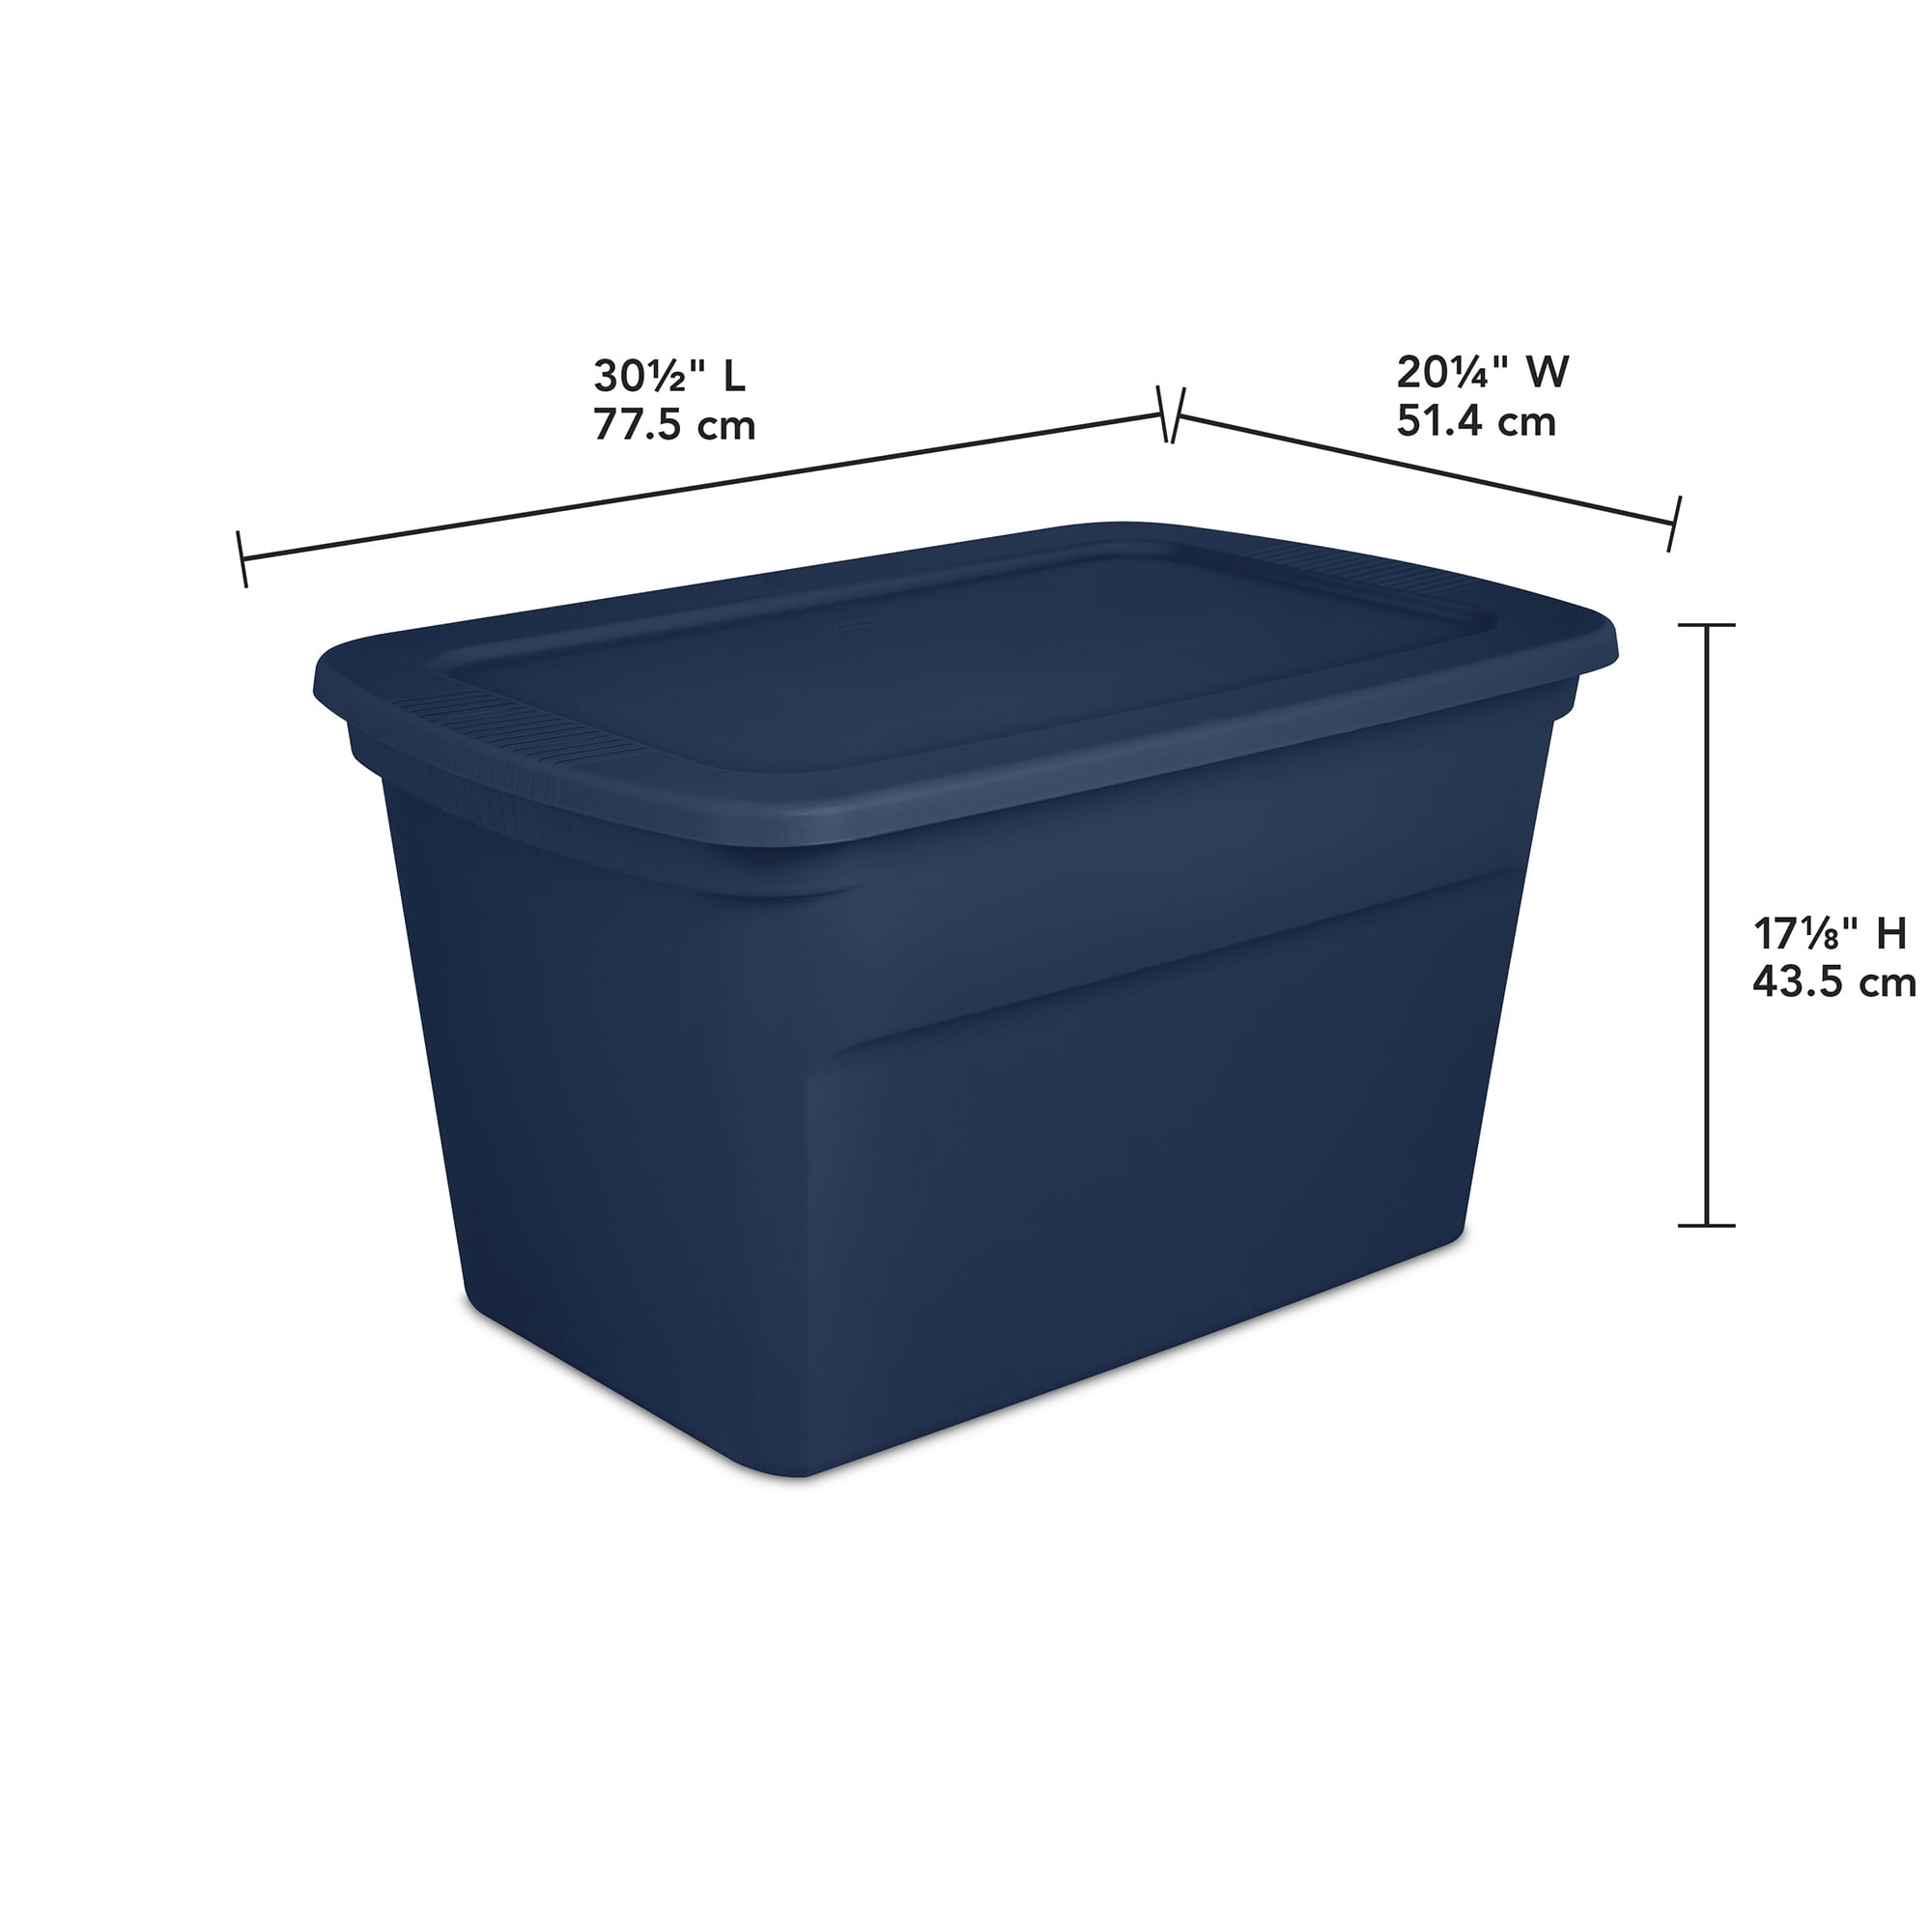 30 Gallon Tote Box Plastic Storage Containers Stackable Bin with